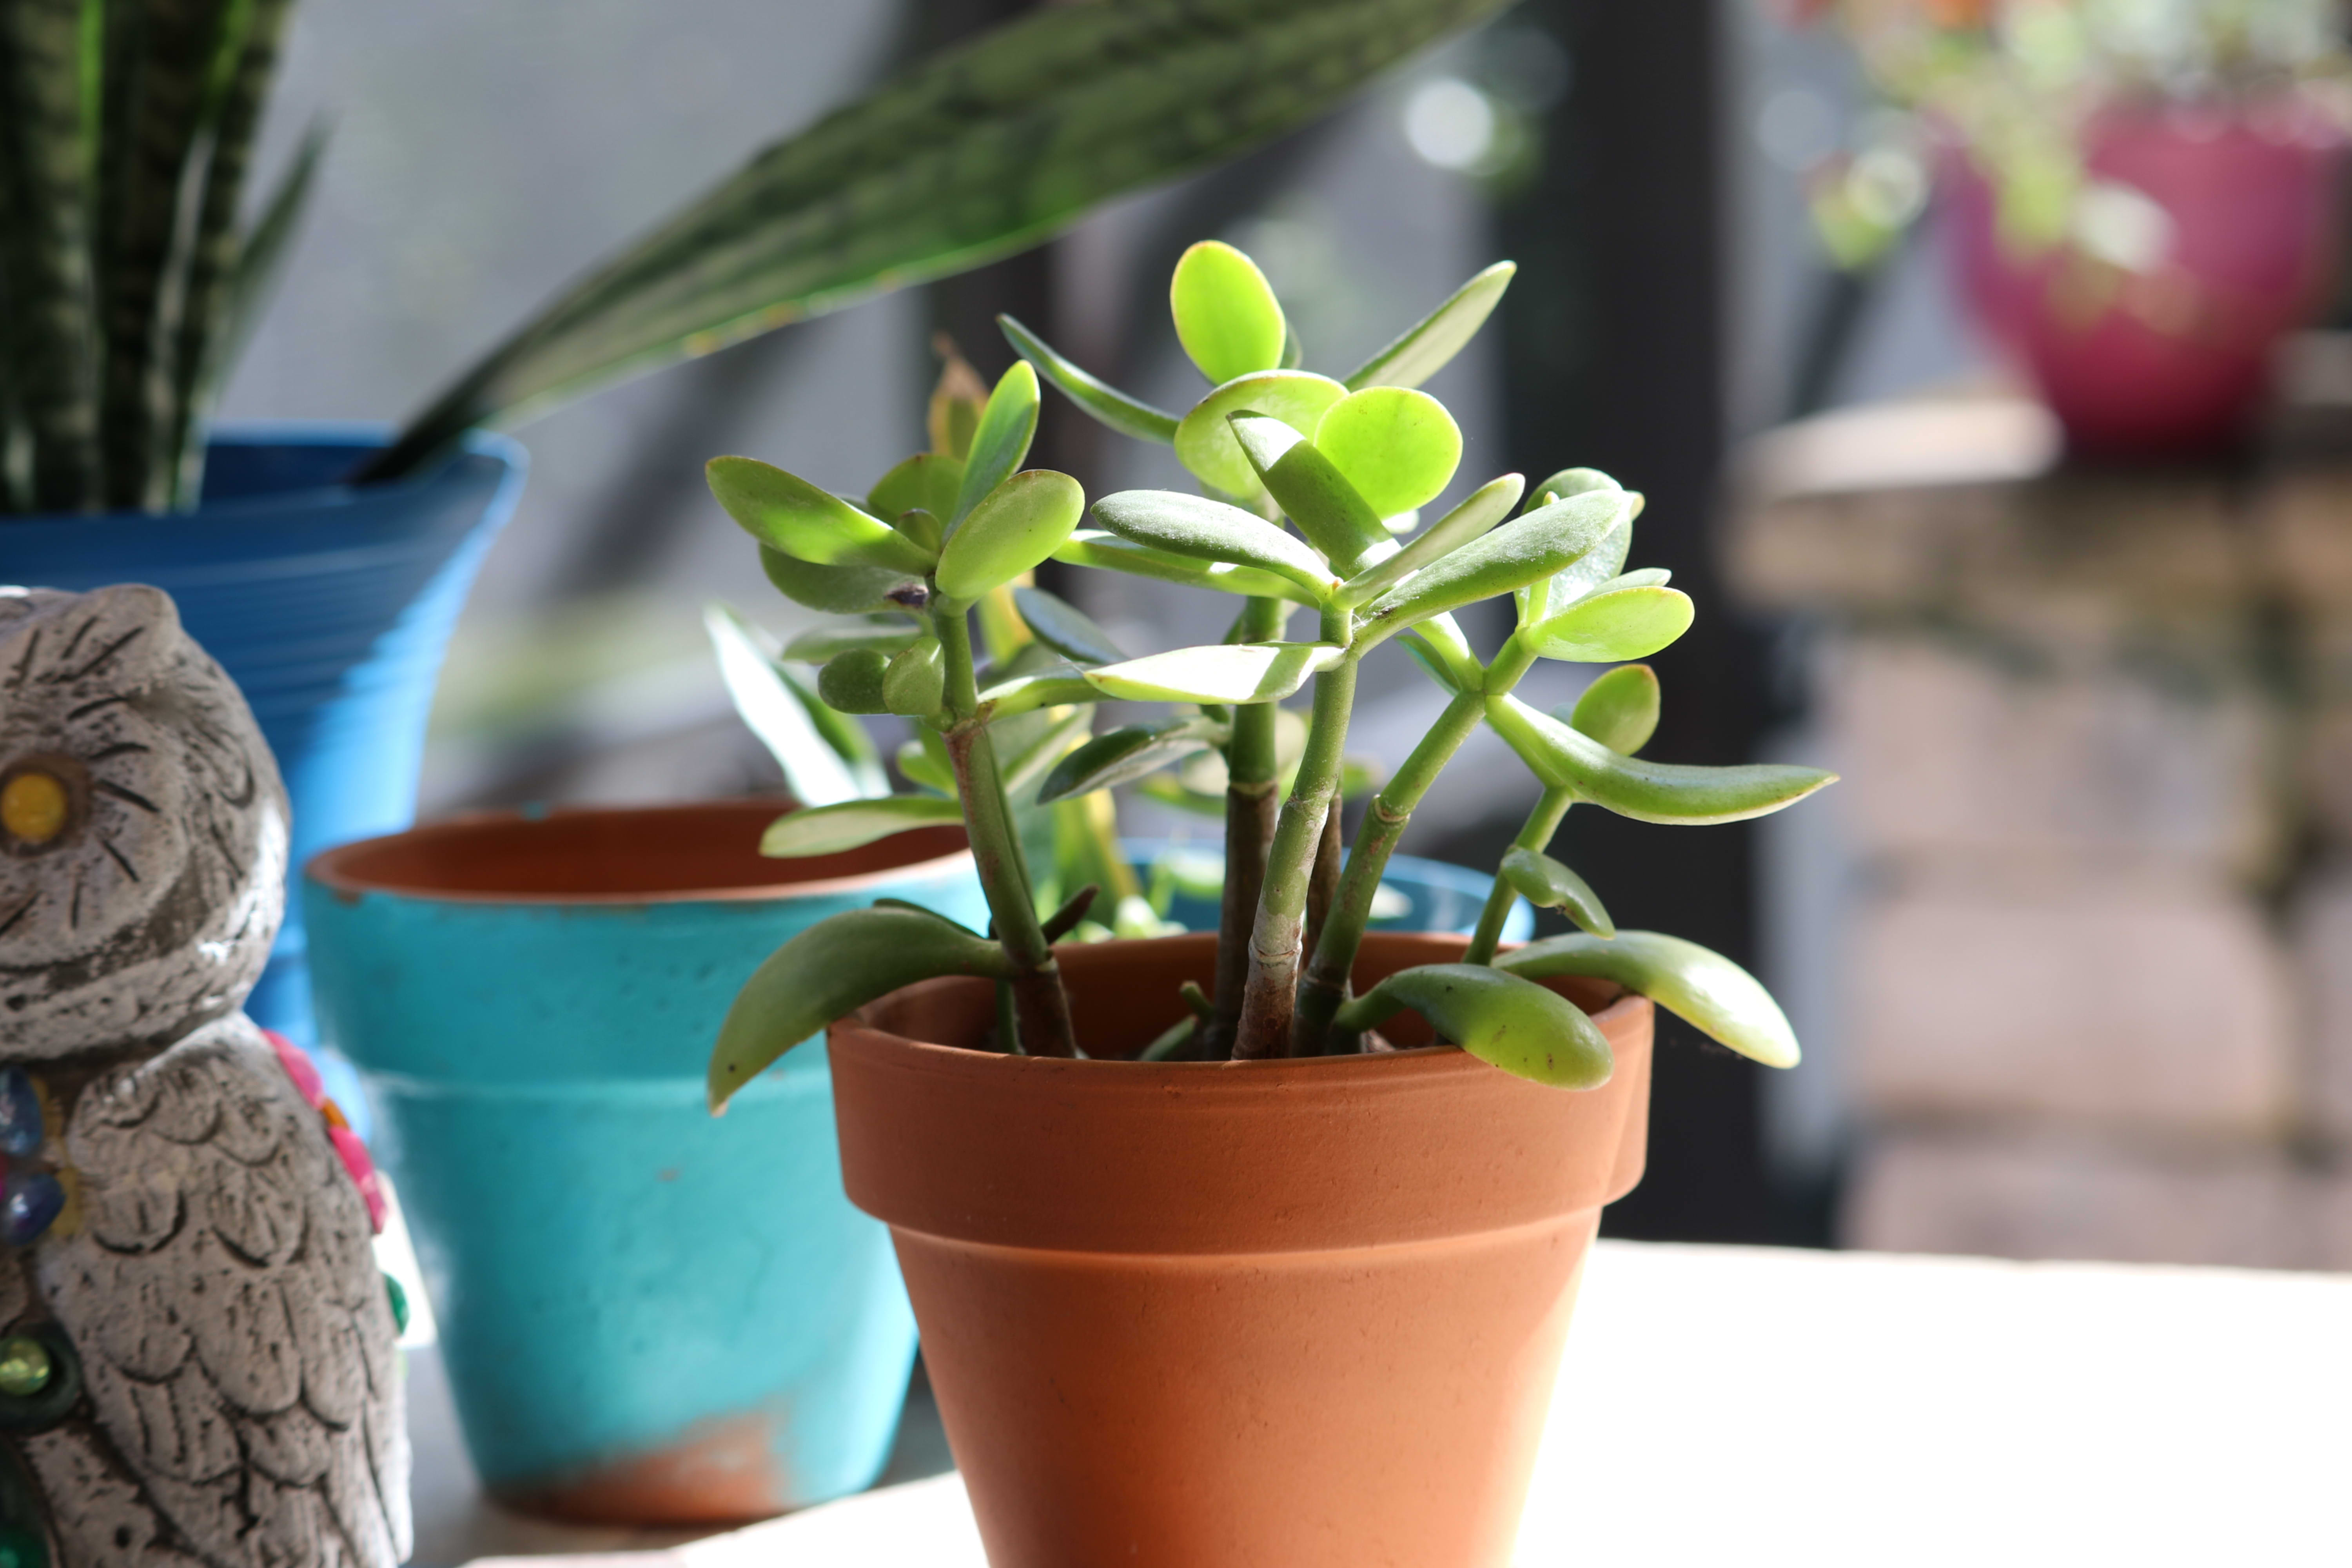 Jade Plant Soil & How To Choose The Best Potting Mix